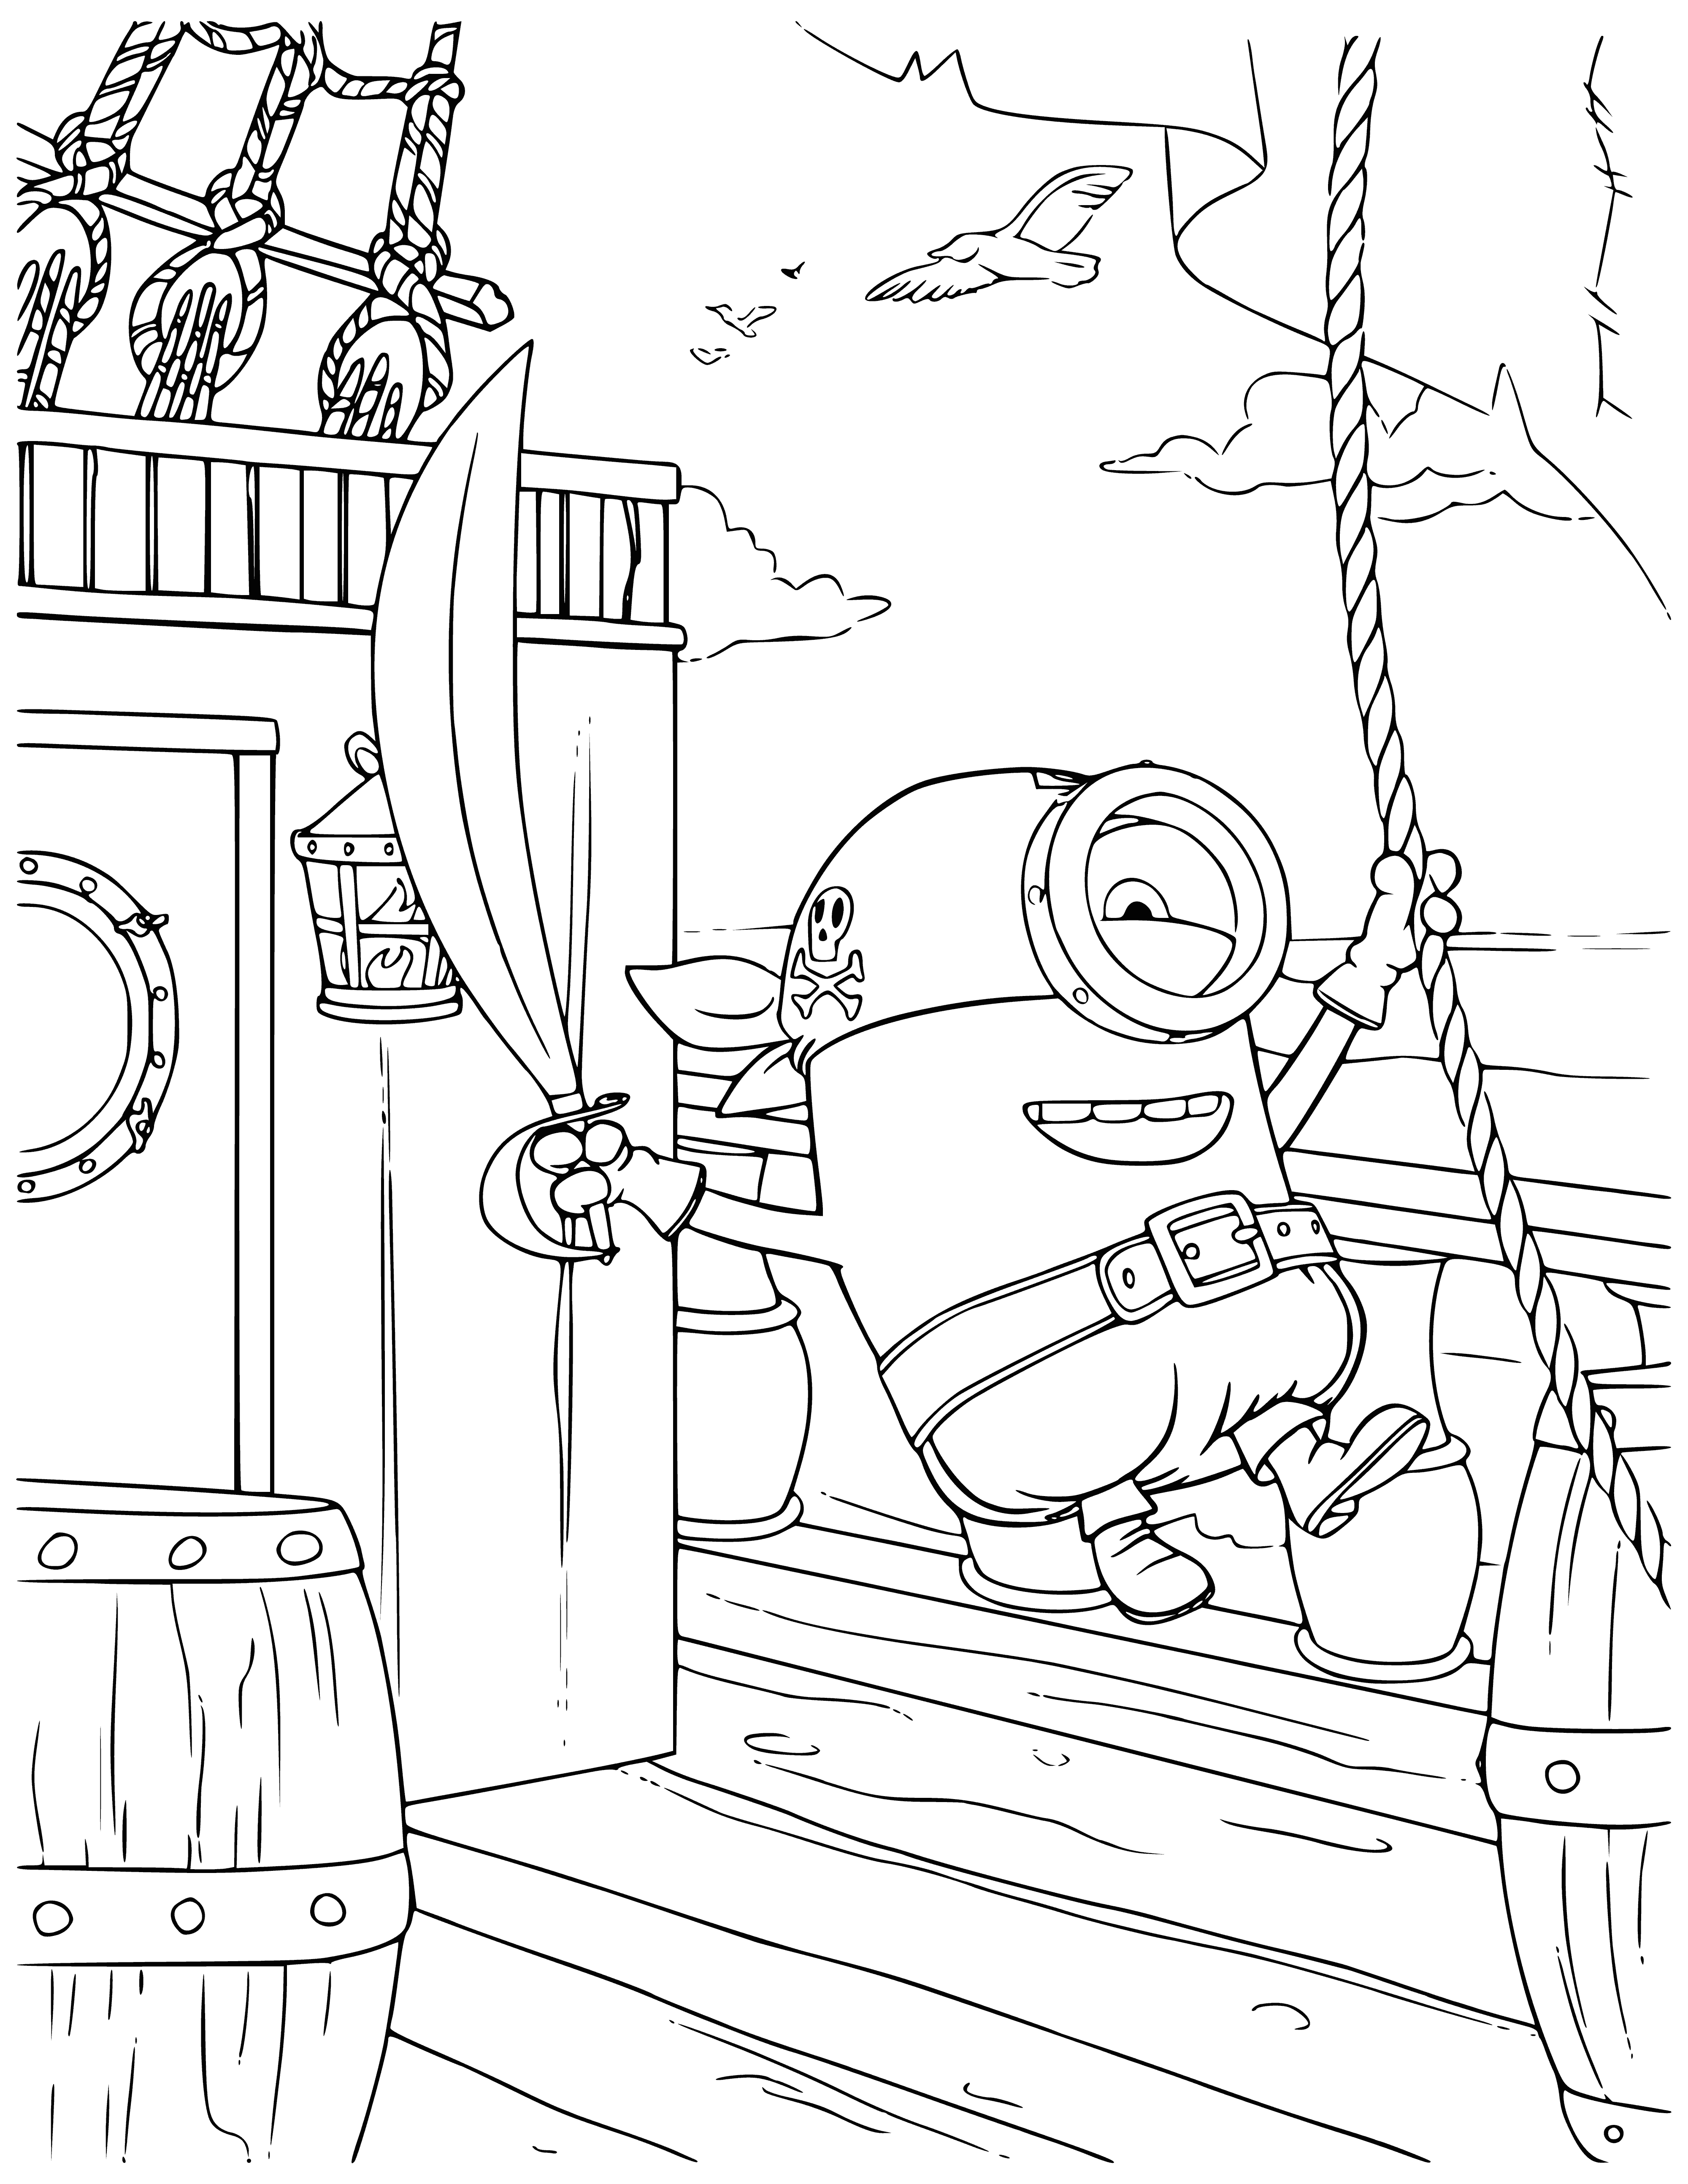 coloring page: A Minon with a mohawk, eye patch, red shirt and blue overalls stands with a sword ready, beside a treasure chest. #Minions #treasure